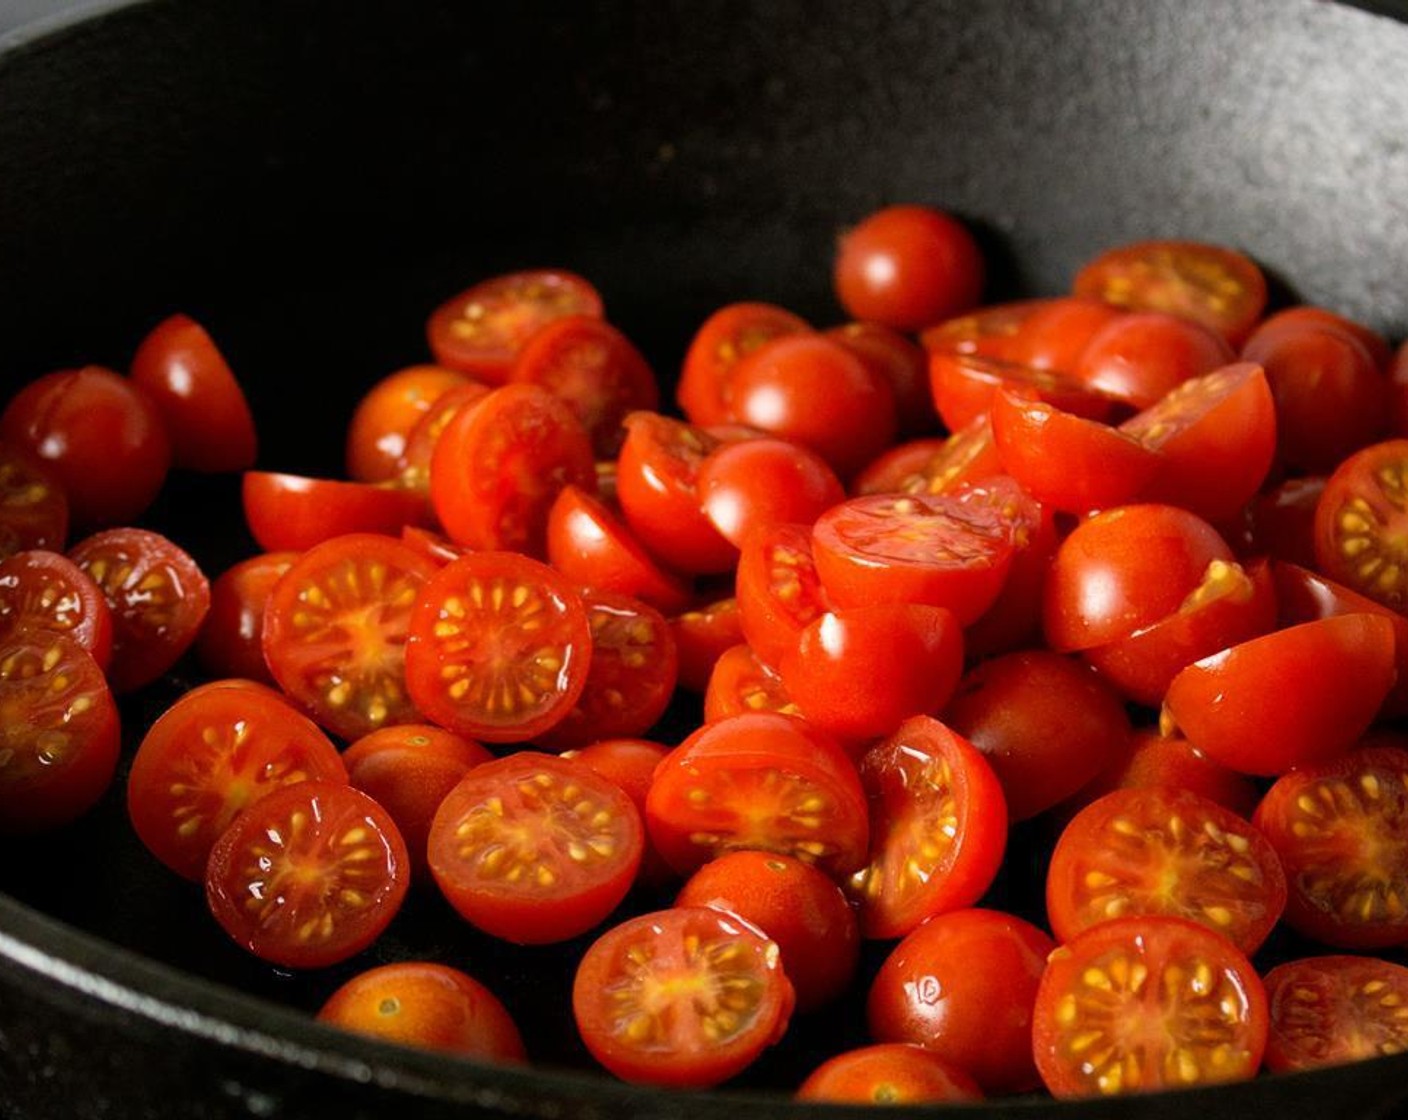 step 1 Combine Cherry Tomatoes (2 cups), juice of the Lemon (1/2), Distilled White Vinegar (1/2 Tbsp), Brown Sugar (1/2 cup), Crushed Red Pepper Flakes (1/4 tsp), Freshly Ground Black Pepper (1 pinch), and Salt (1 pinch) in a cast iron pan.